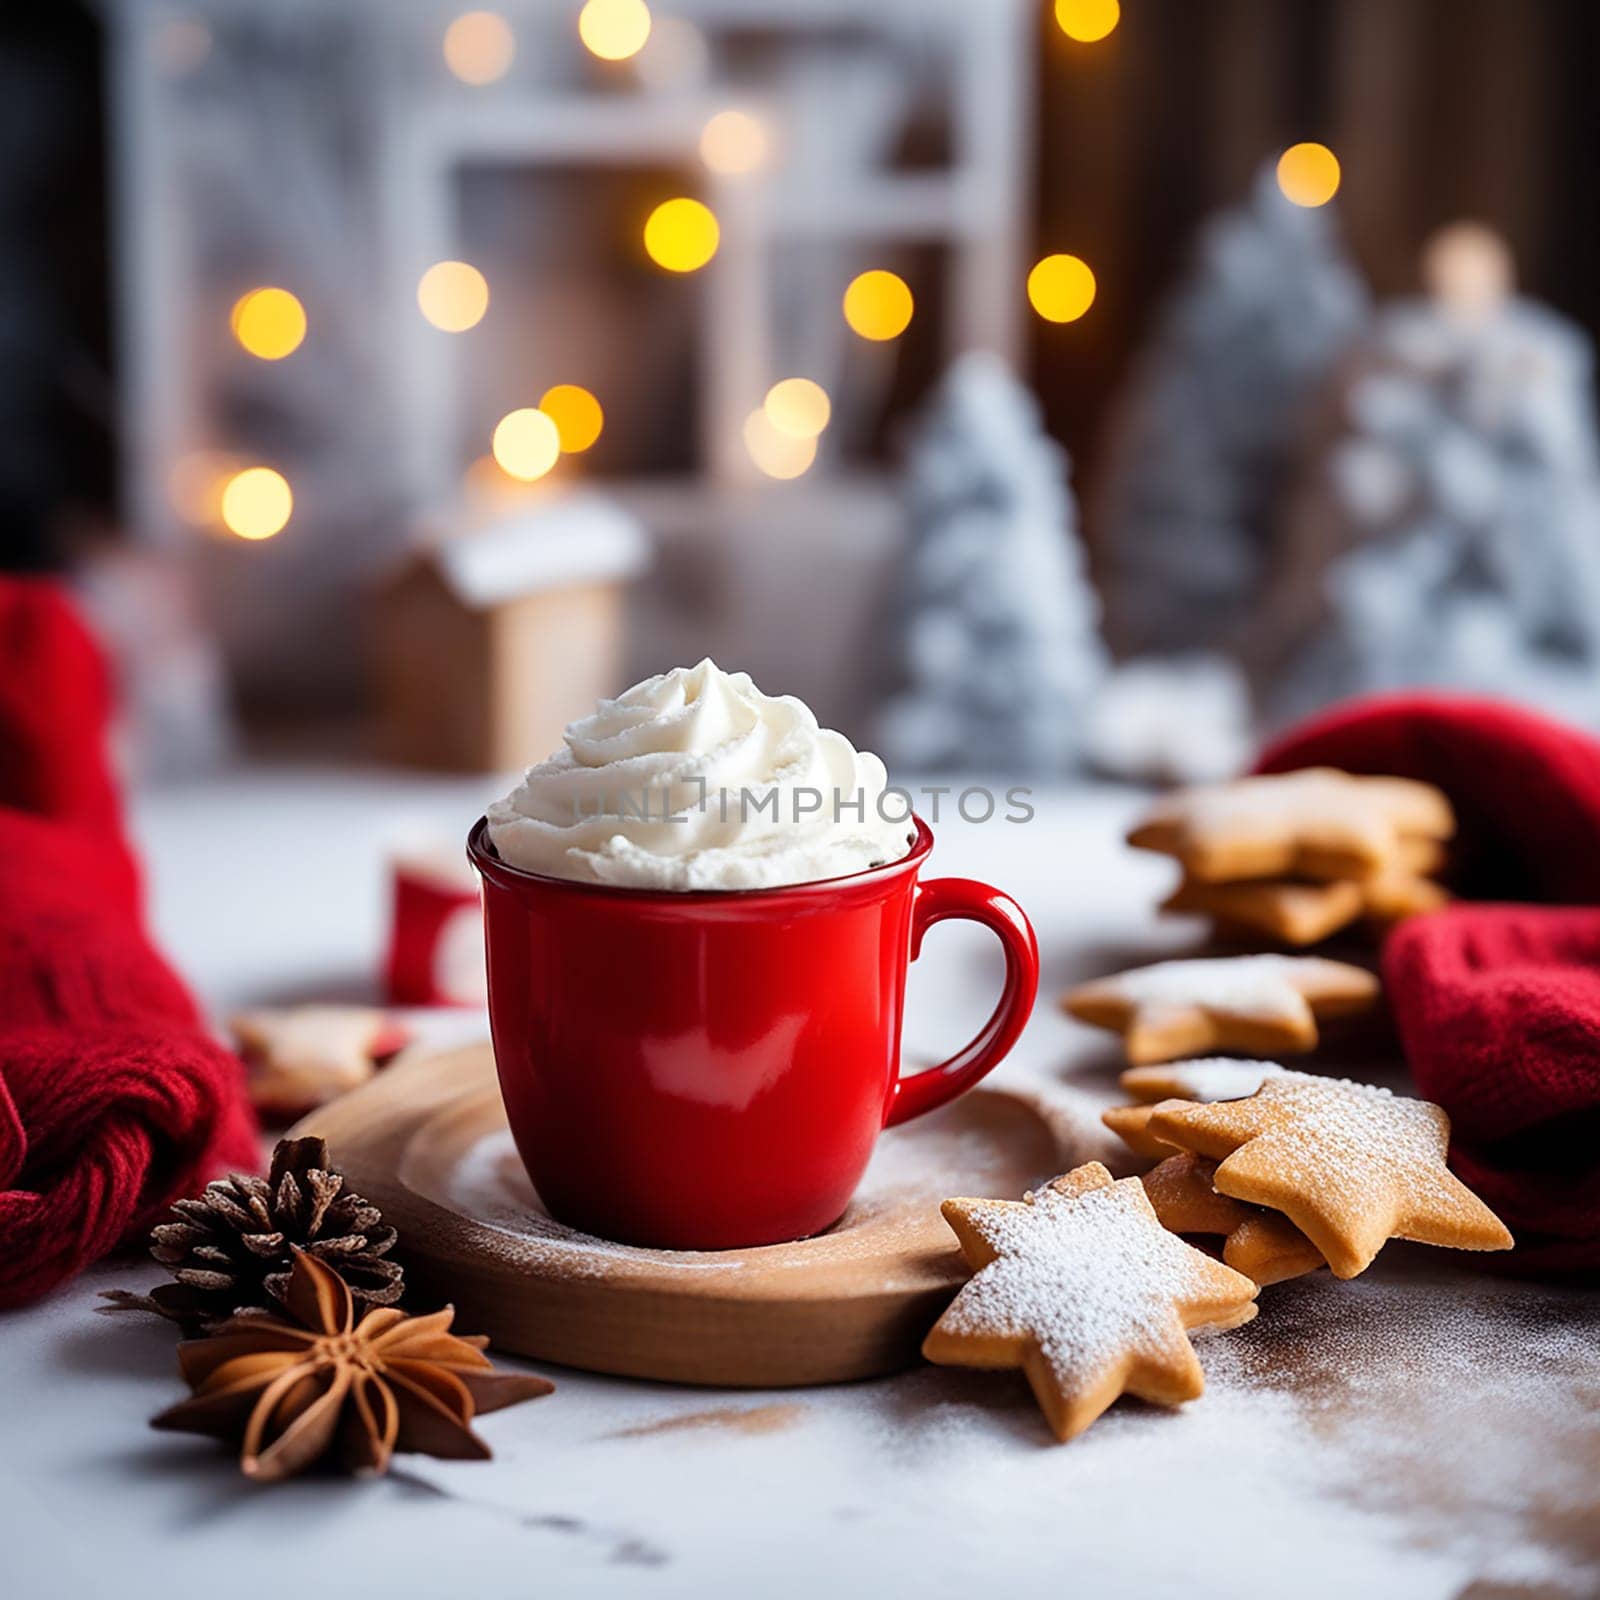 Cozy Winter Delights: Whipped Cream Hot Coffee in a Red Mug with Star-Shaped Cookies and Warm Scarf - Rural Still Life